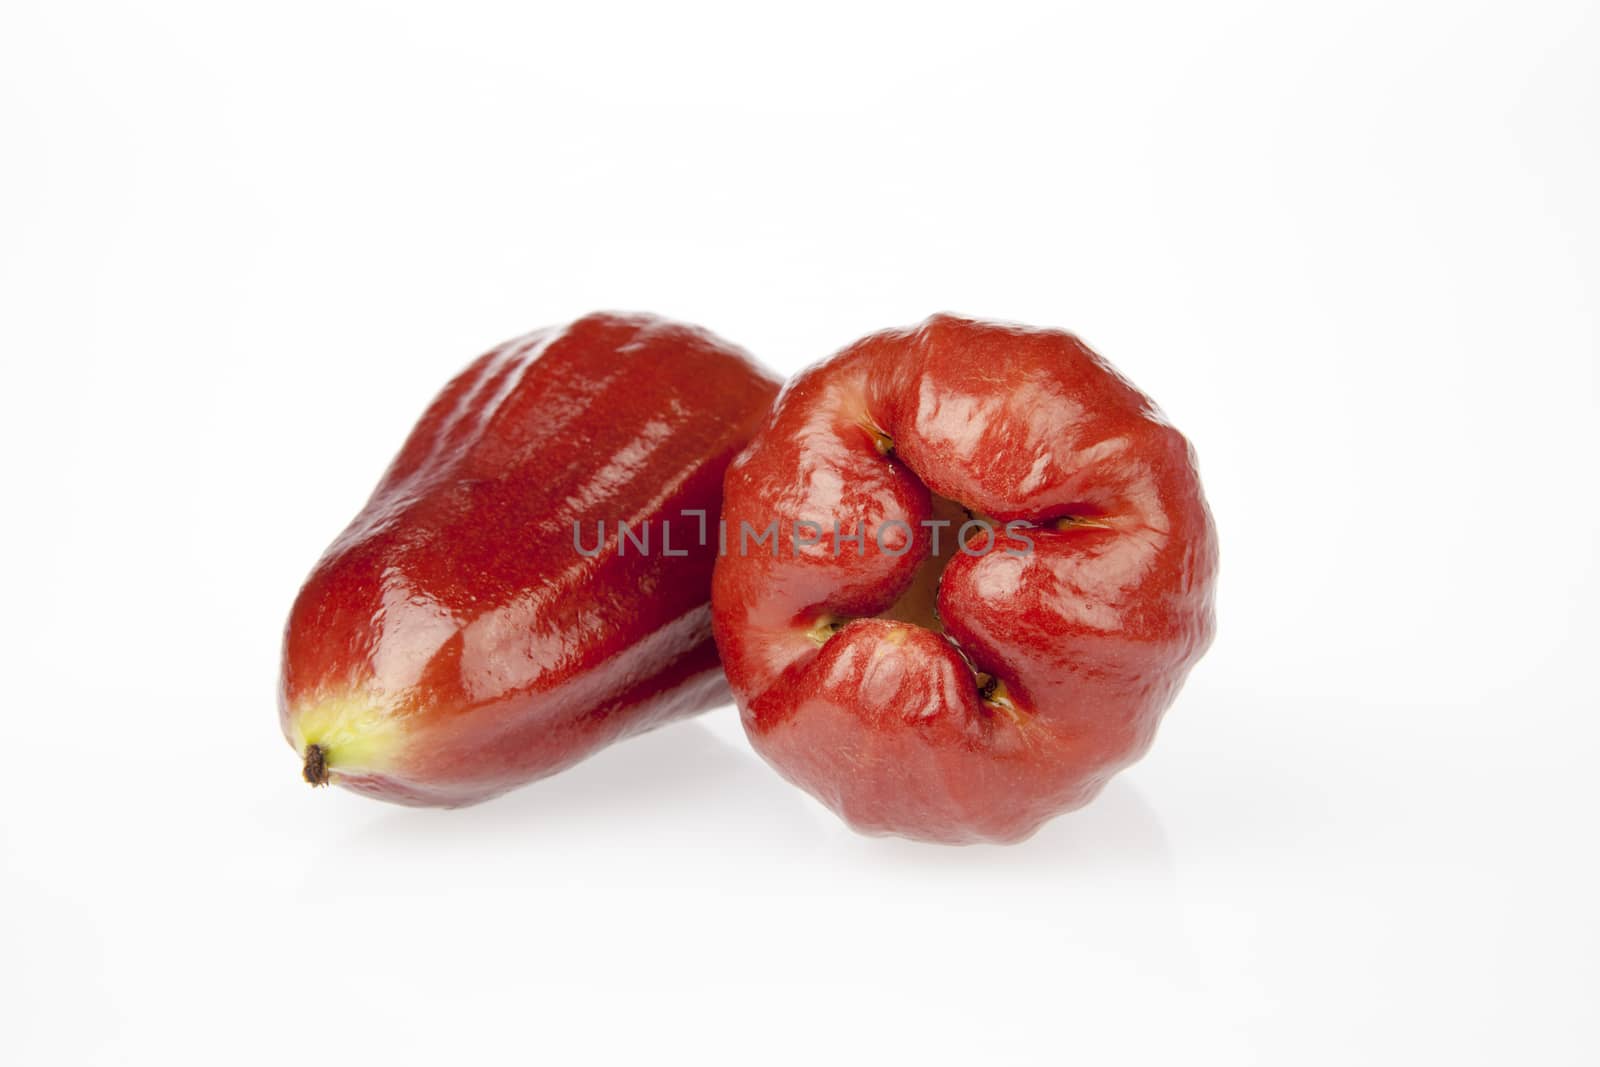 Two rose apple on a white background.